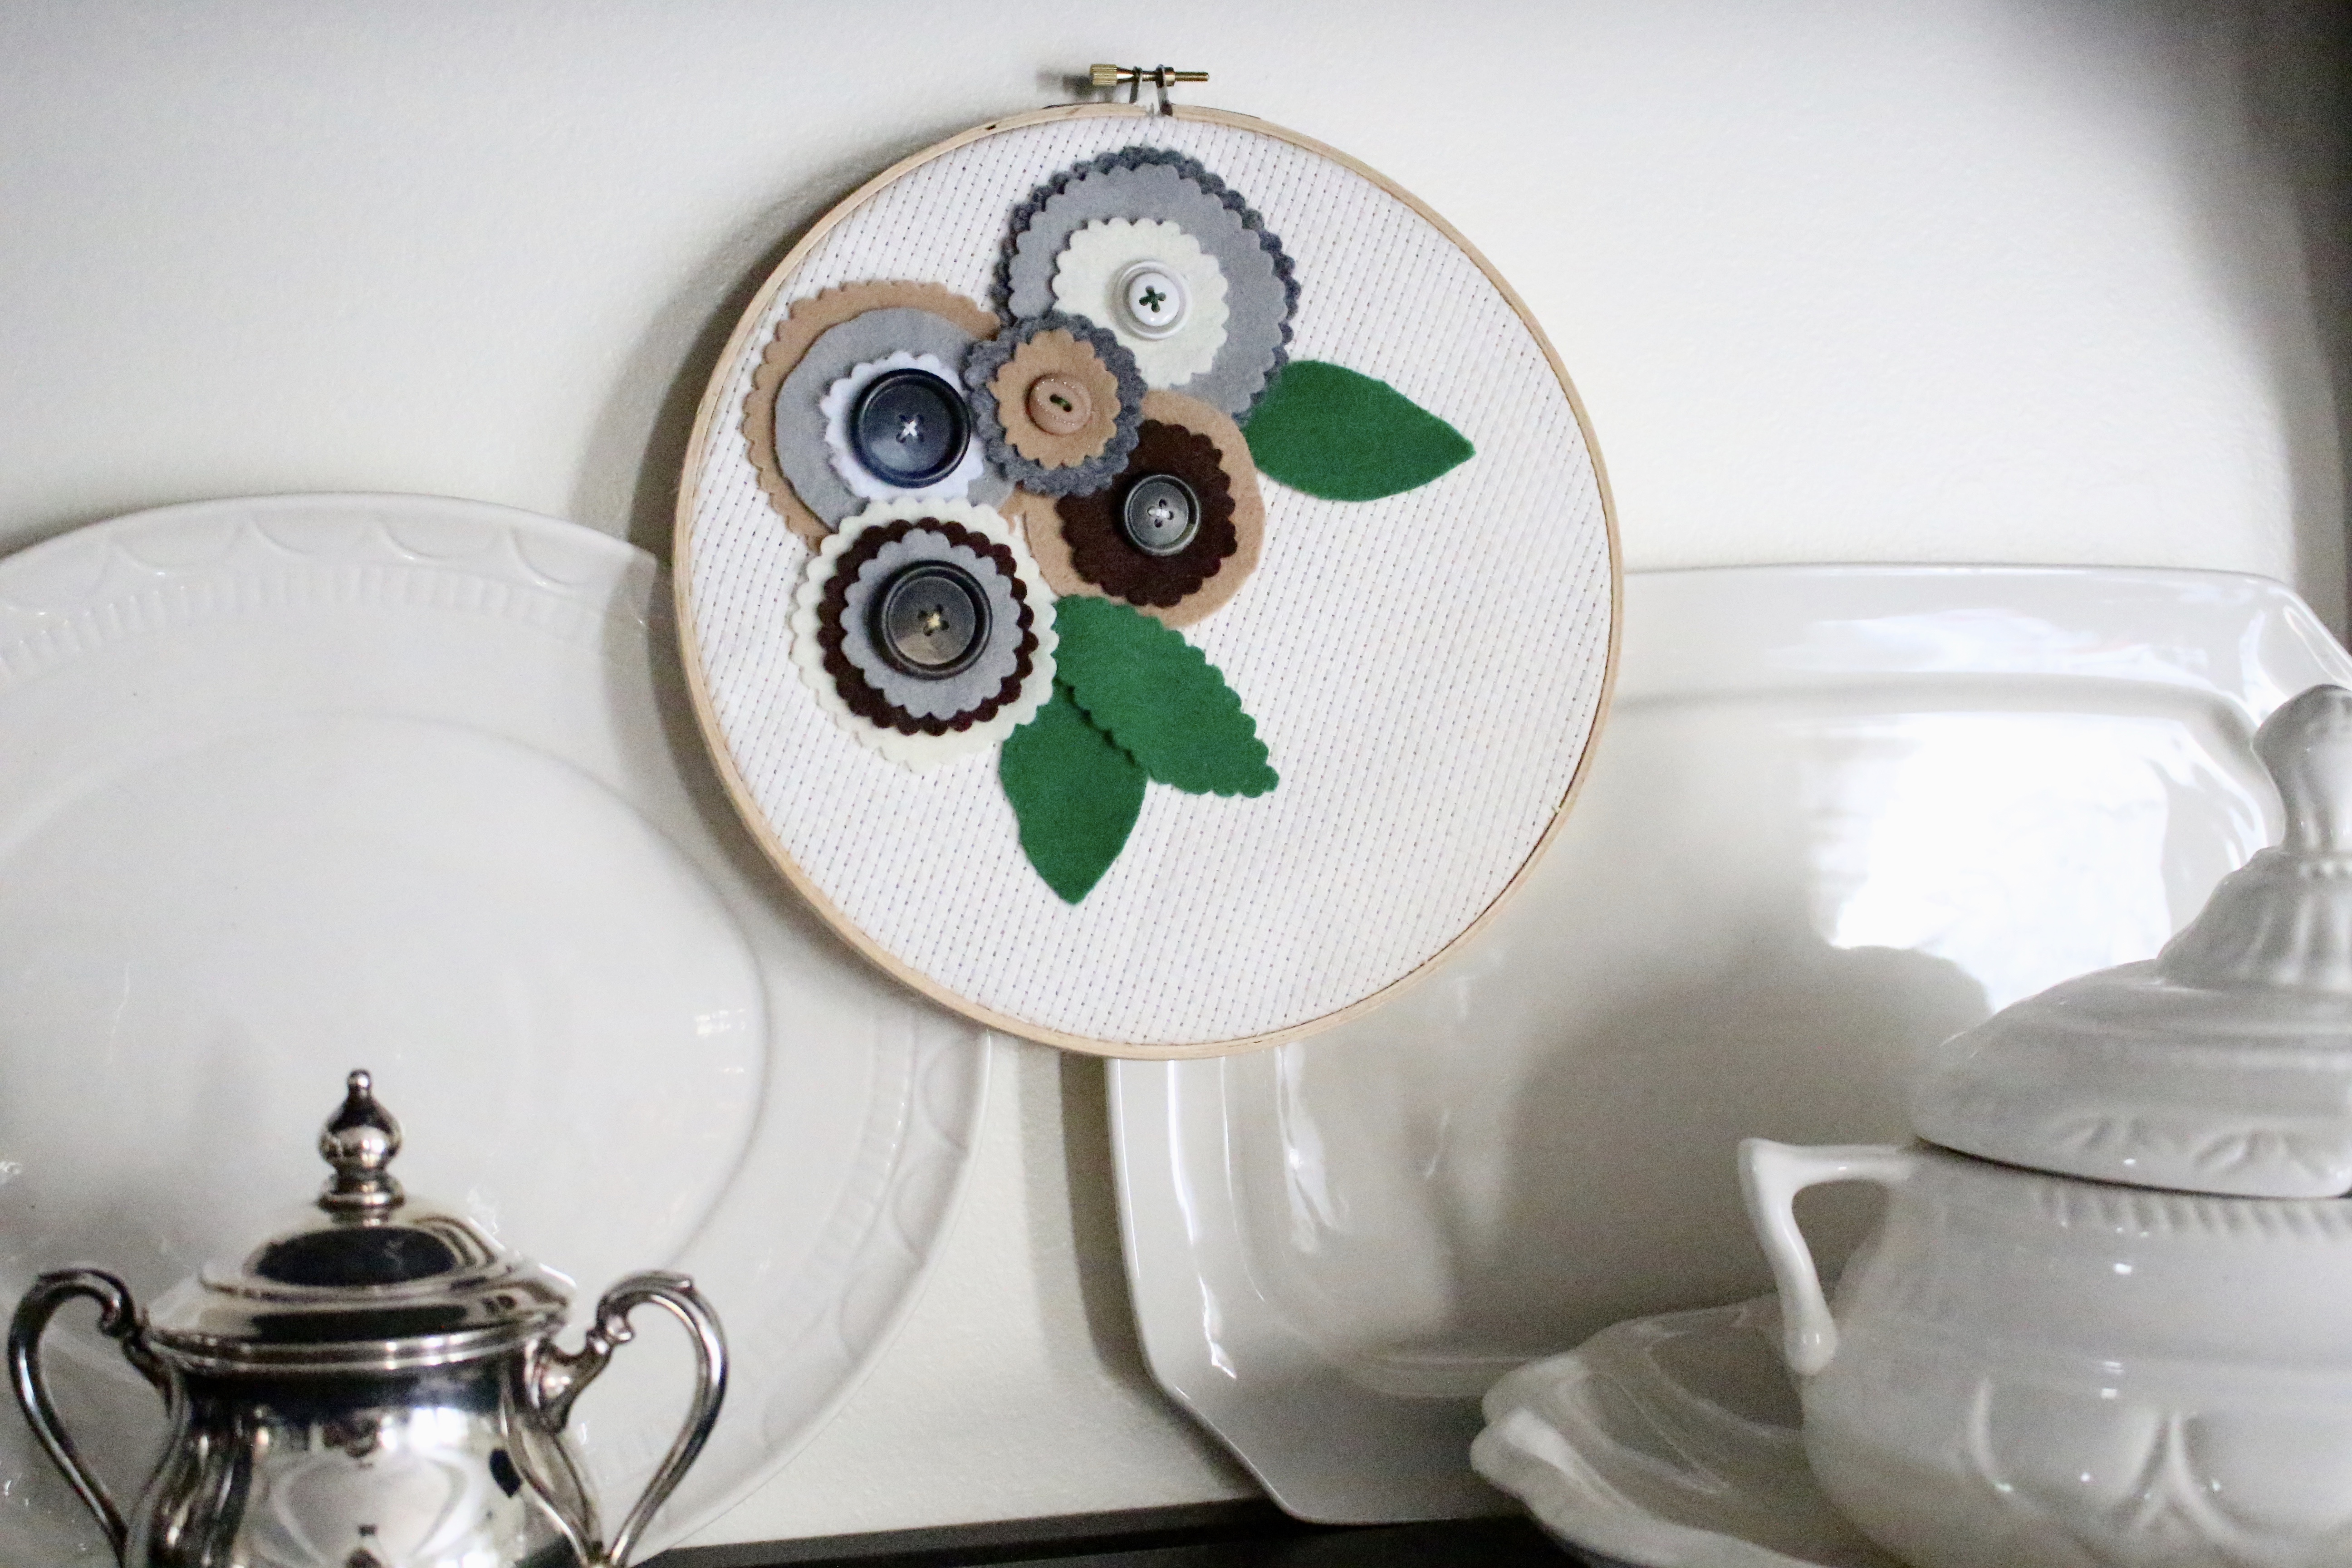 Embroidery Hoop Art with Felt Flowers by www.whitecottagehomeandliving.com